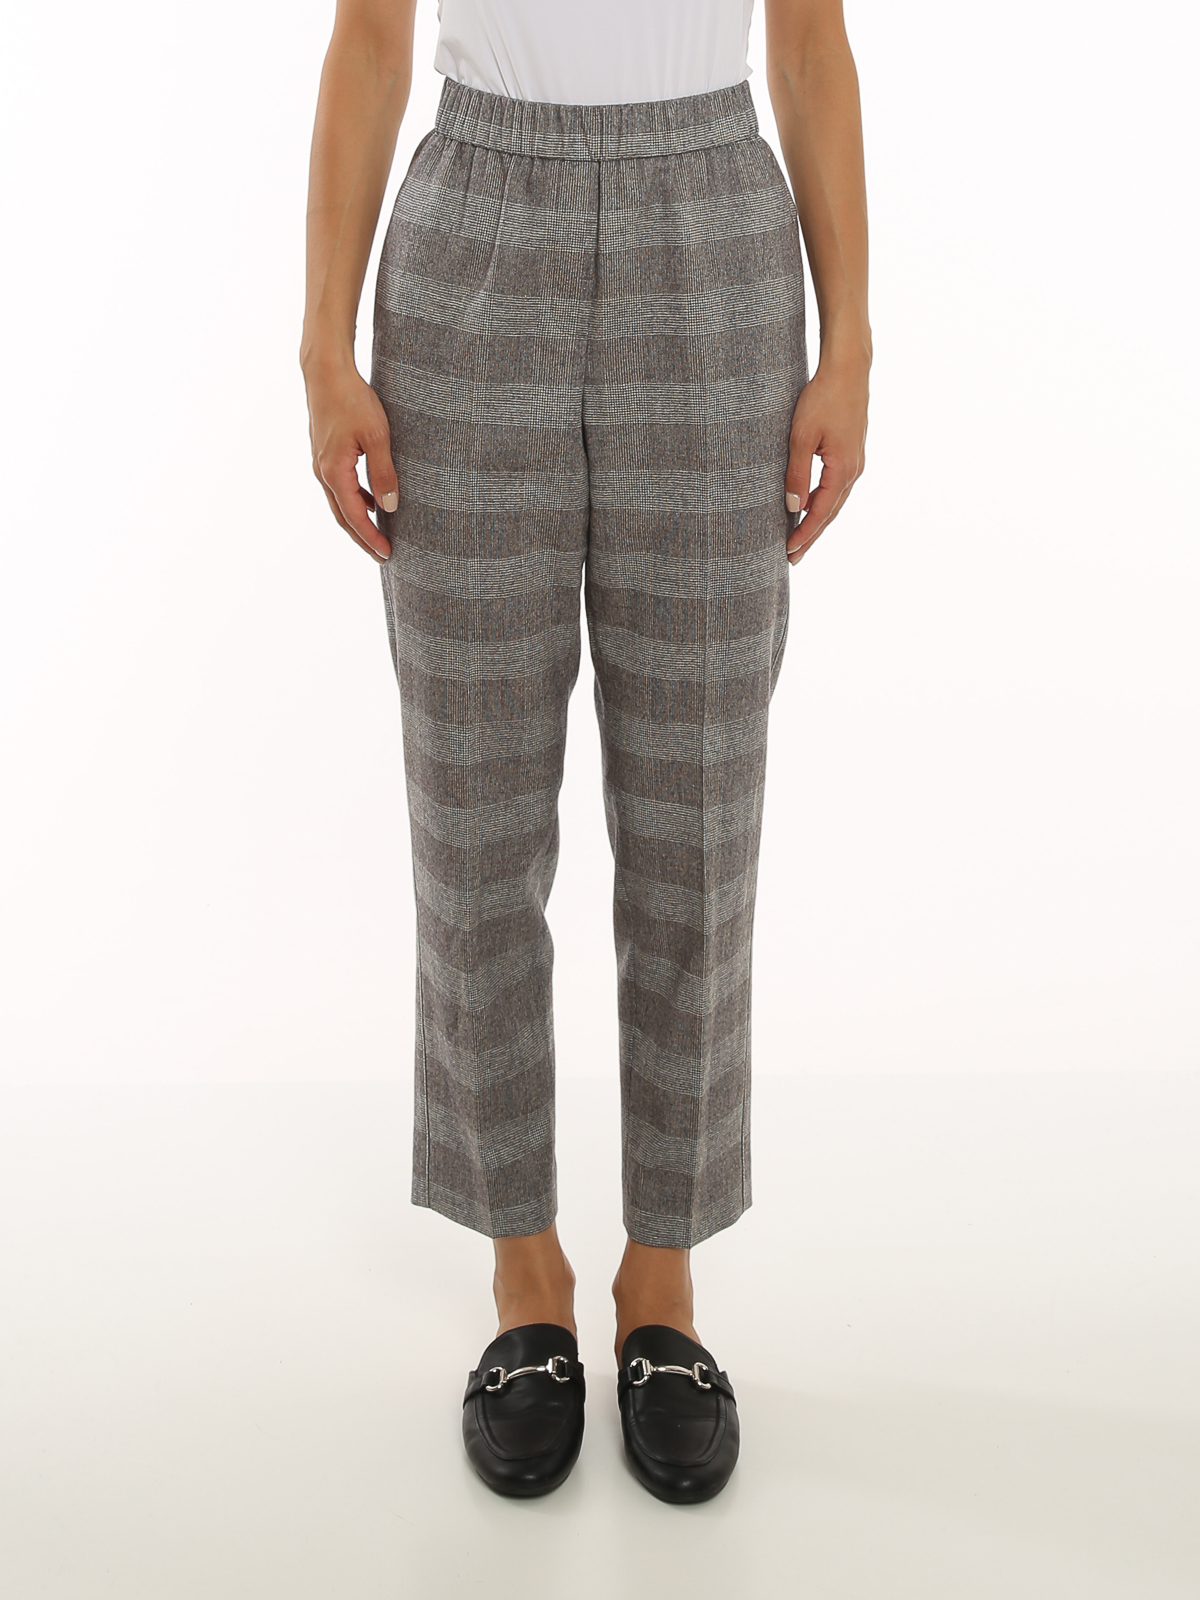 Robell Check Print Soft Knit Trousers 5145654234 Free UK Delivery